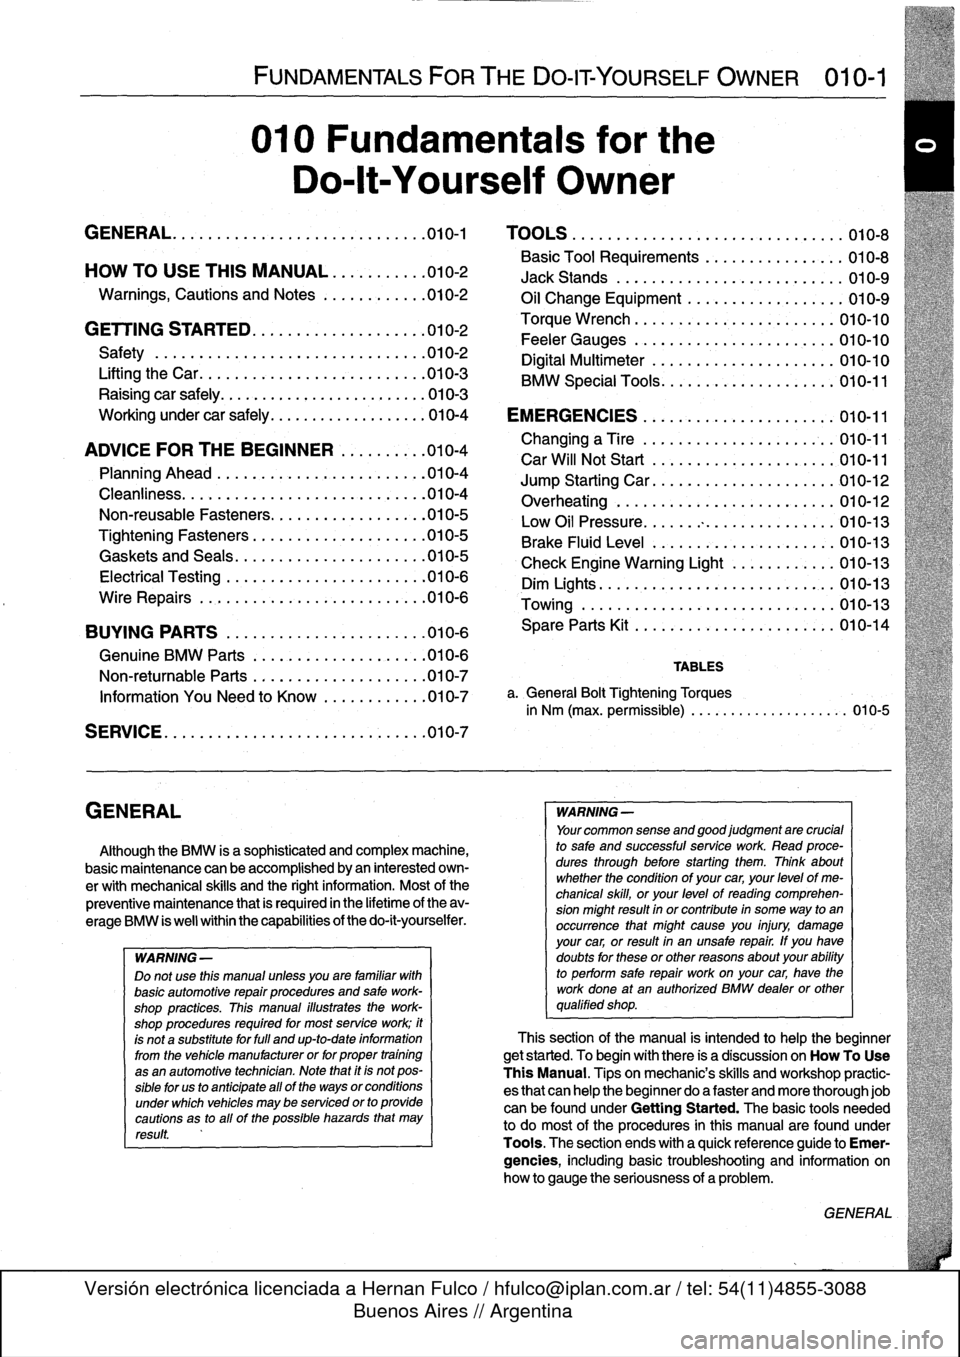 BMW 328i 1998 E36 Workshop Manual 
GENERAL

FUNDAMENTALS
FORTHE
DO-IT
YOURSELF
OWNER

	

010-1

010
Fundamentals
for
the

Do-lt-Yourself
Owner

GENERAL
.......
.
.
.
......
.
.........
.
.
.010-1

	

TOOLS
.
.
...
.
............
.
...